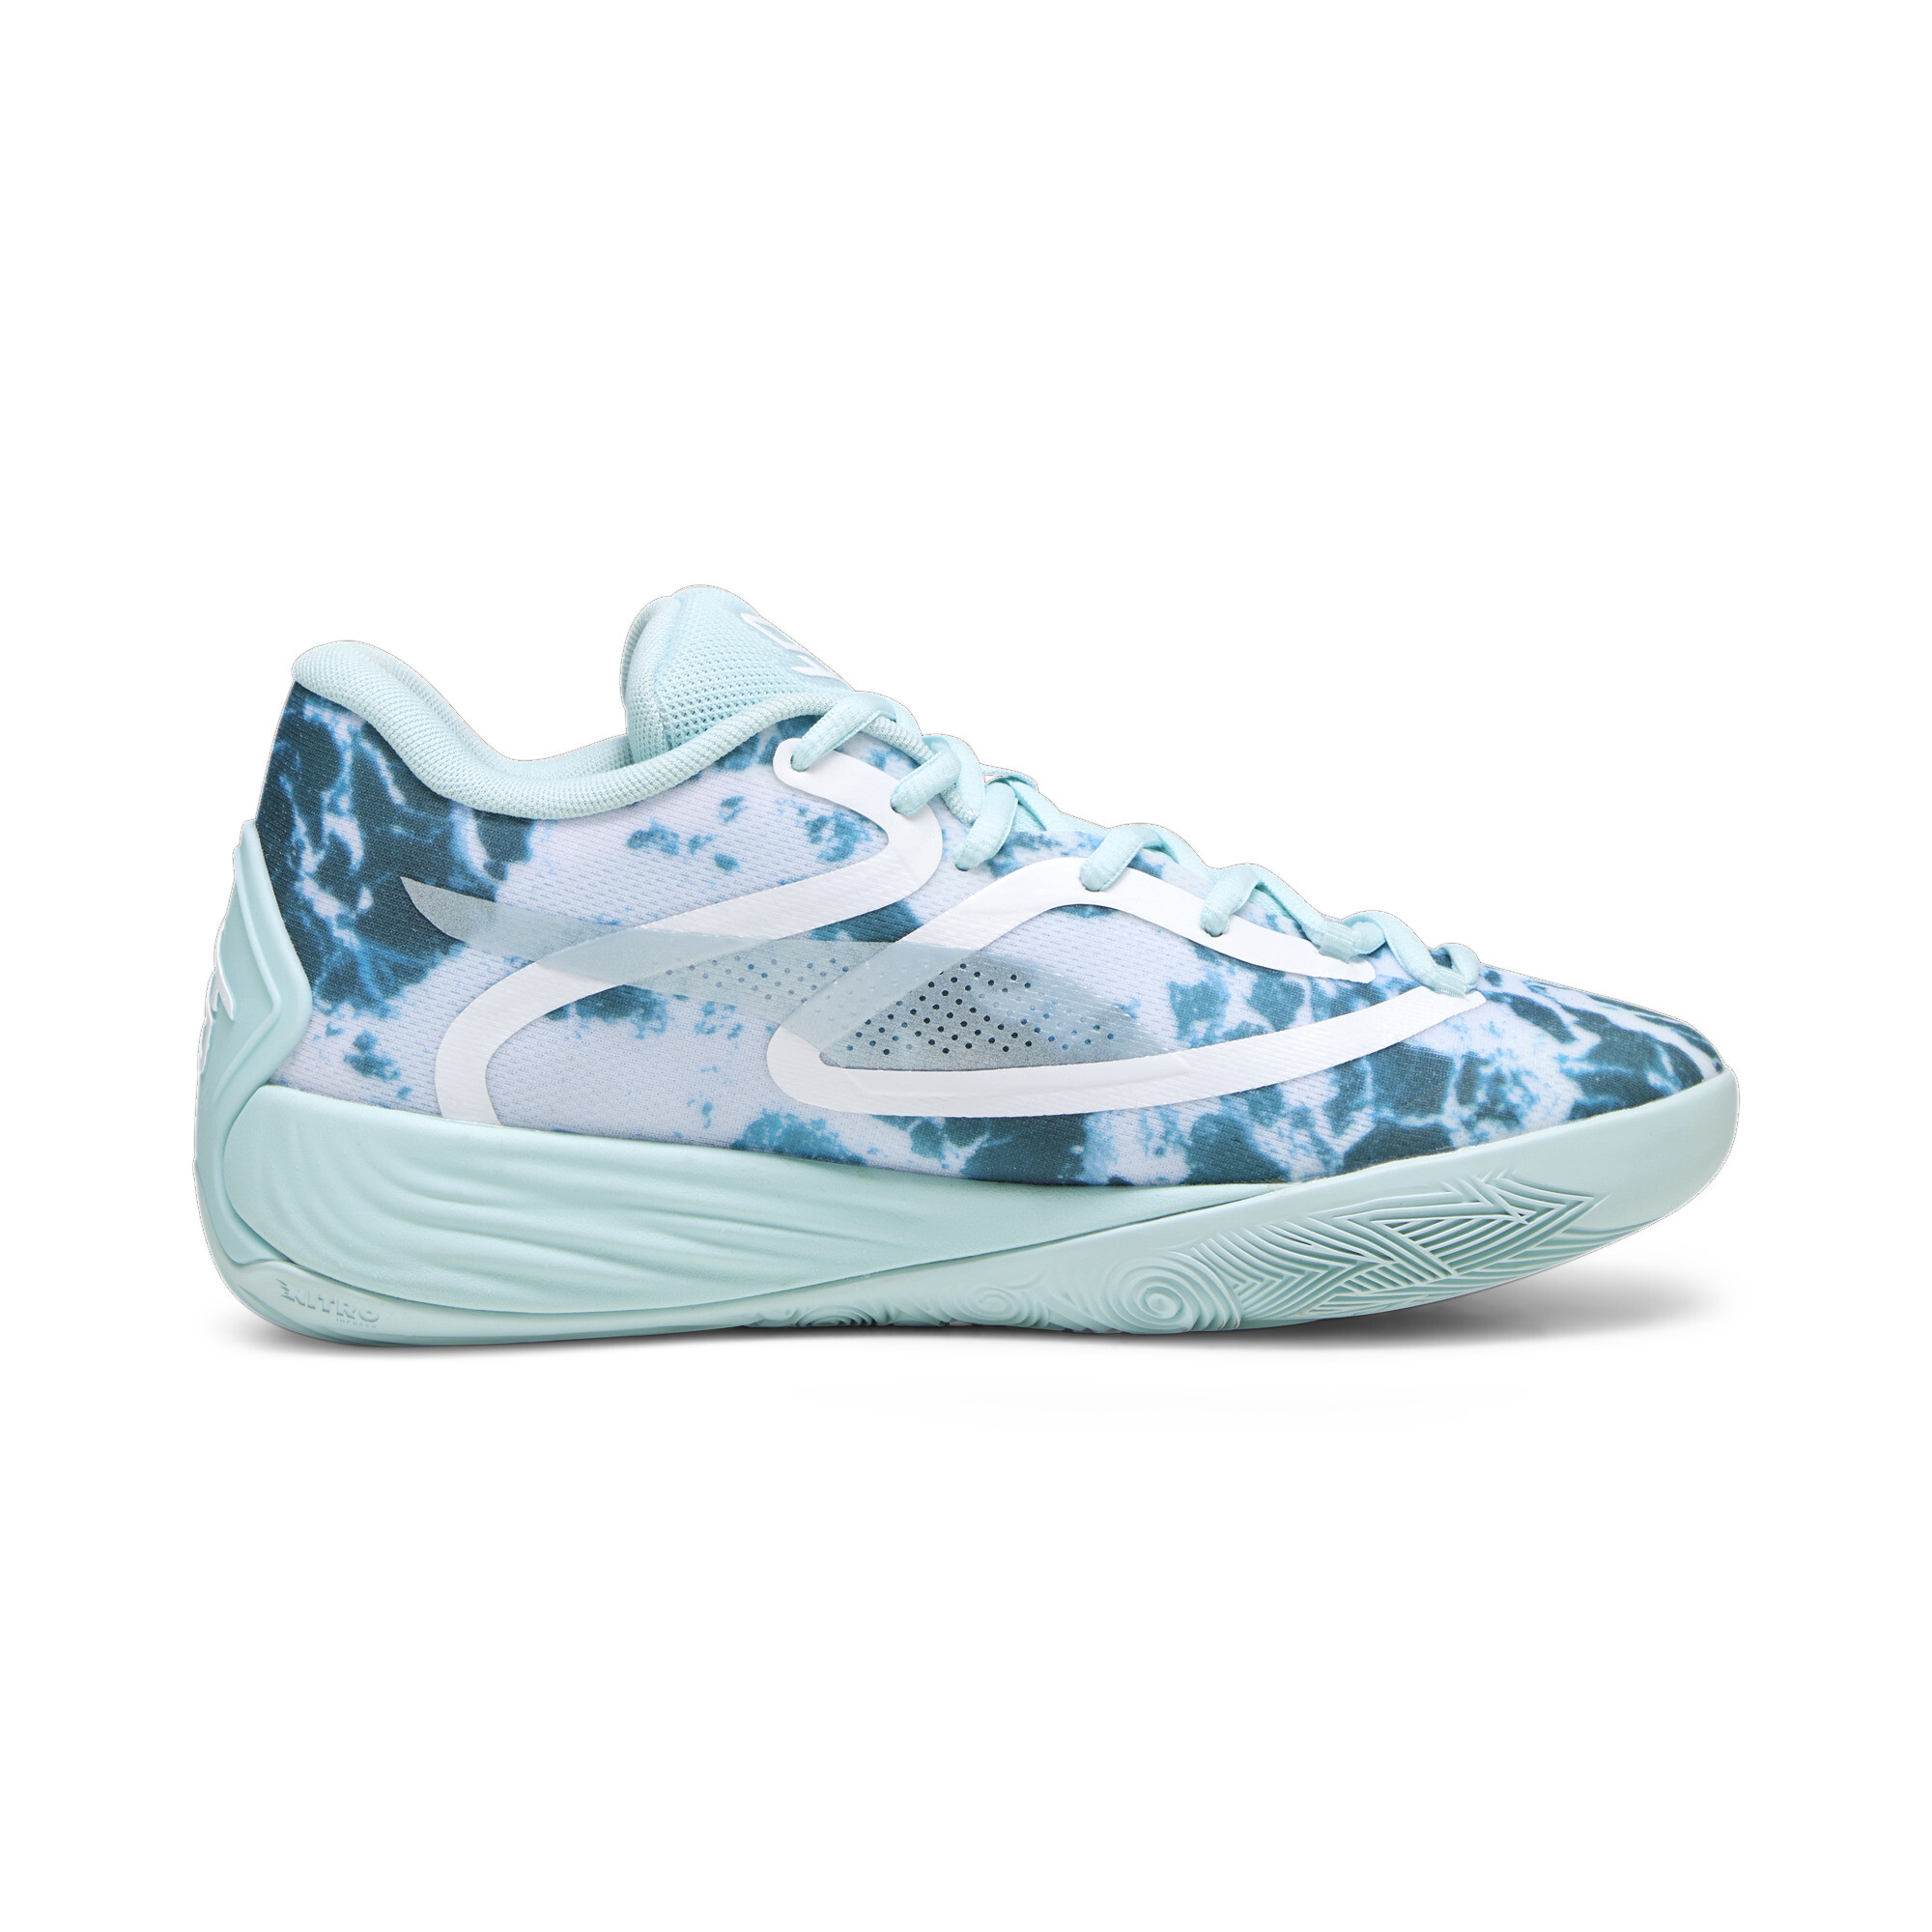 Women's Puma Stewie 2 Water's Basketball Shoes, Blue, Size 40.5, Shoes